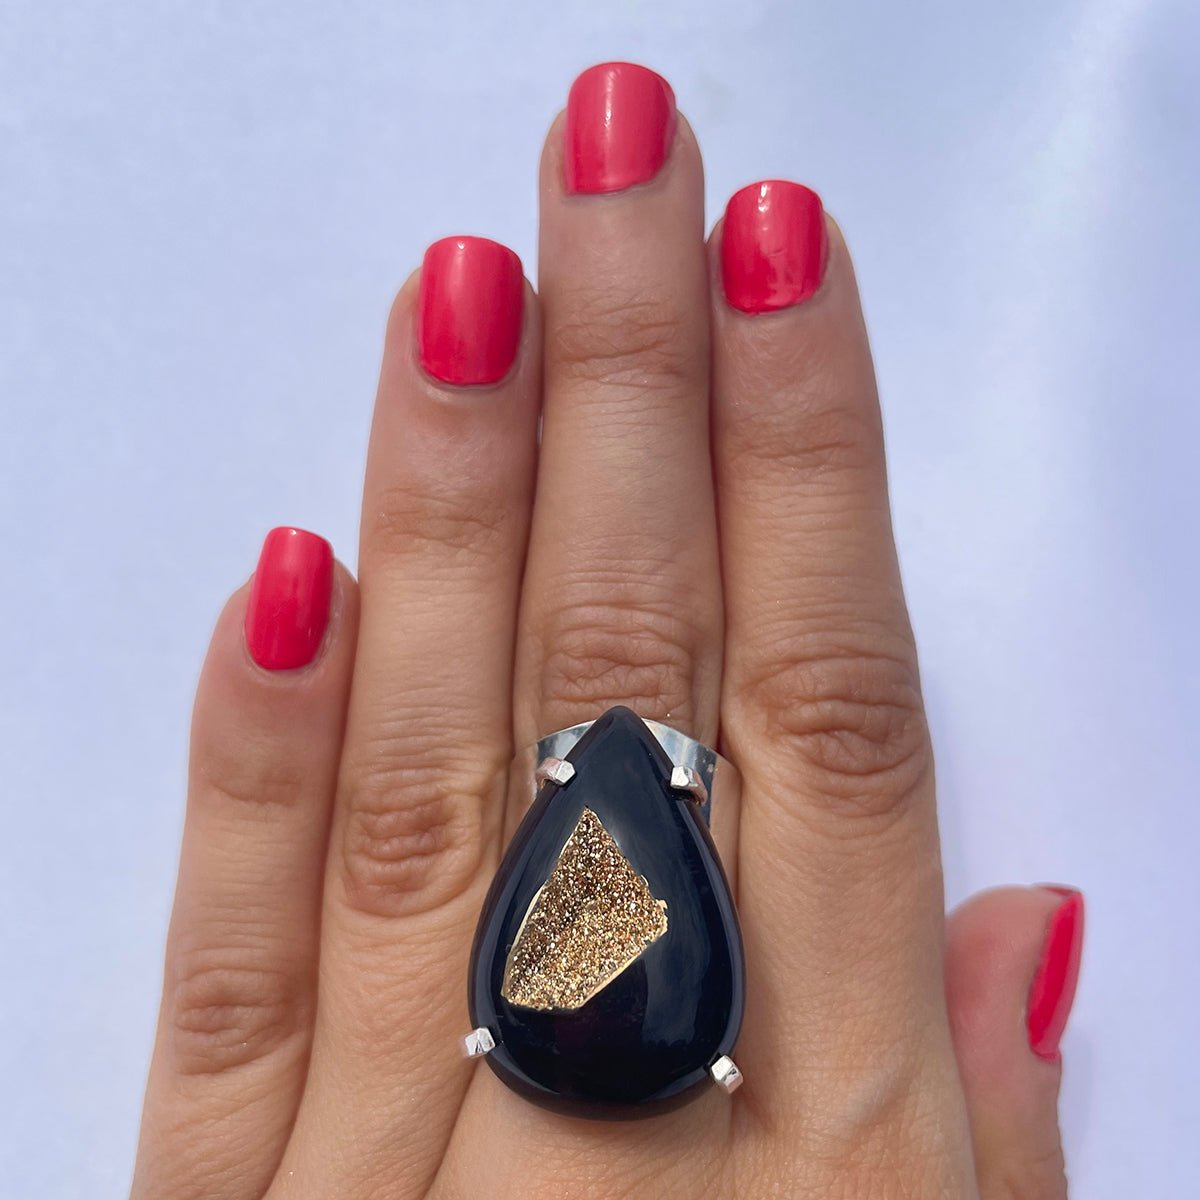 XL Geode Ring - Gold Plated Black Geode